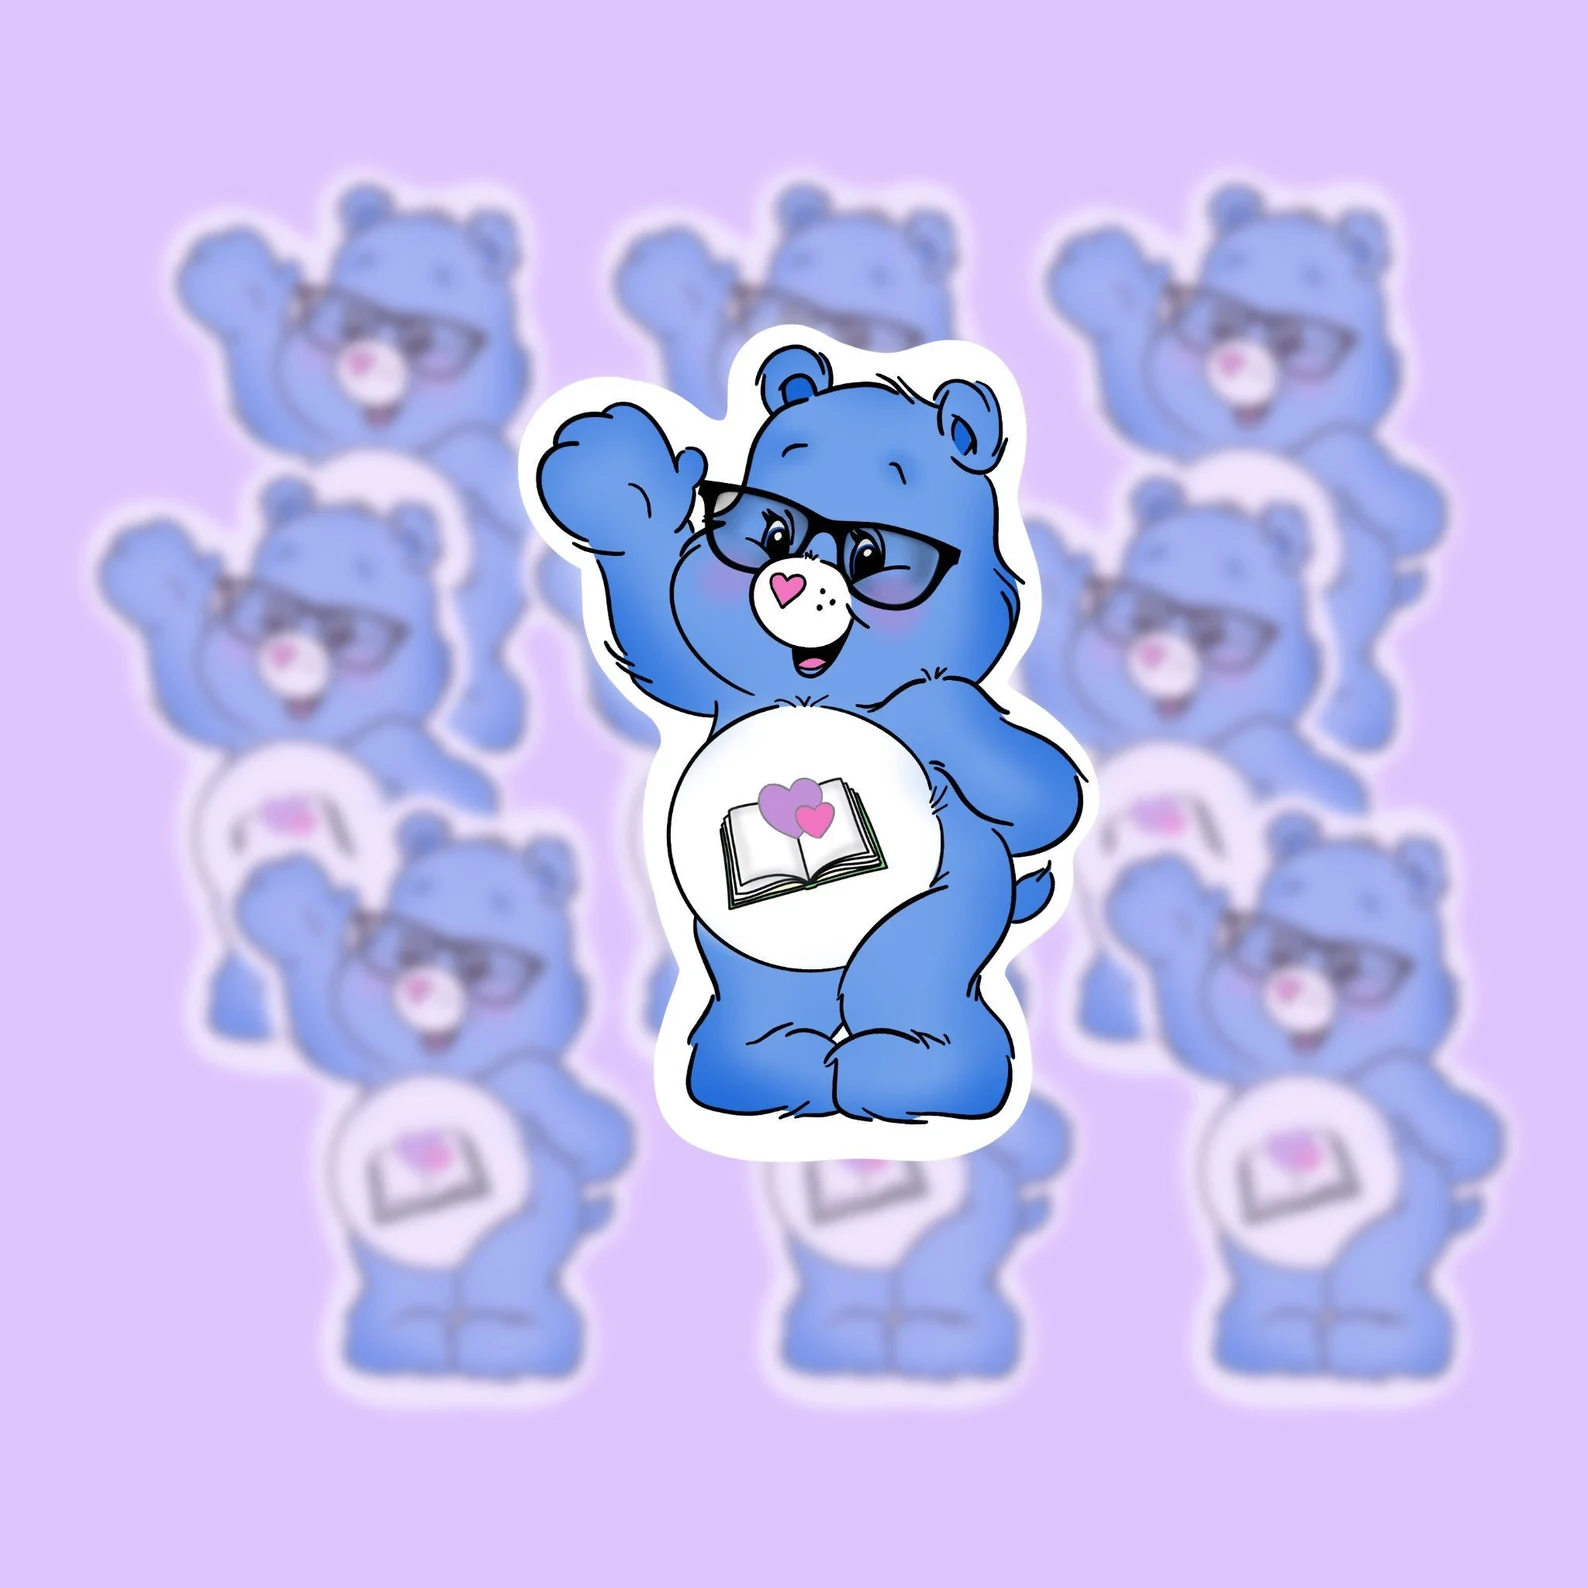 A care bears themed sticker with a book on the purple bear's belly. 